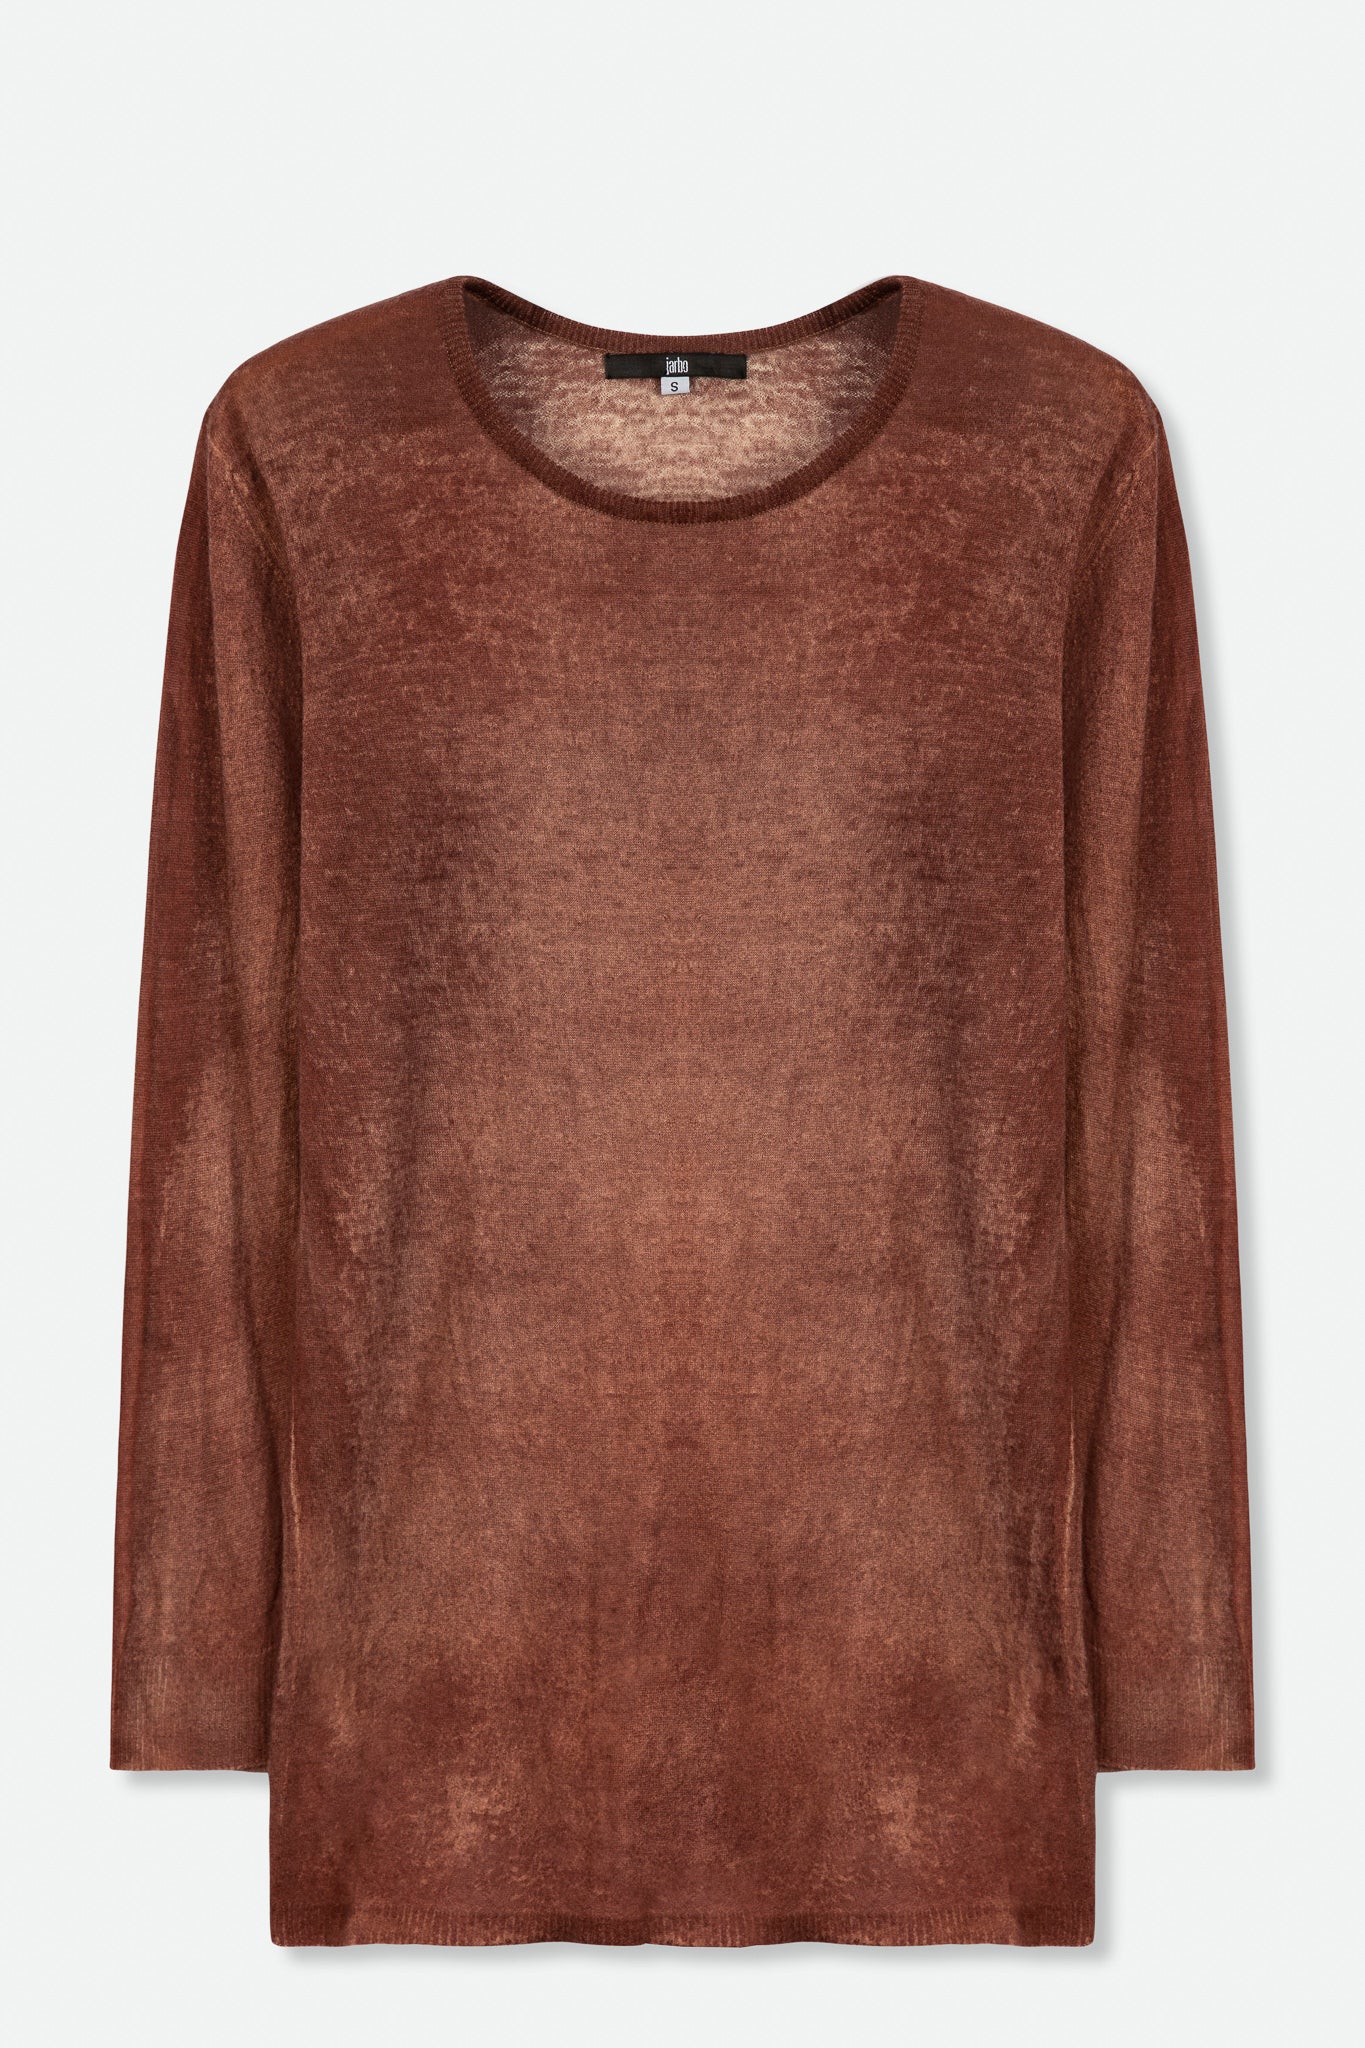 SHARA CREW TOP IN HAND-DYED LIGHTWEIGHT CASHMERE - Jarbo